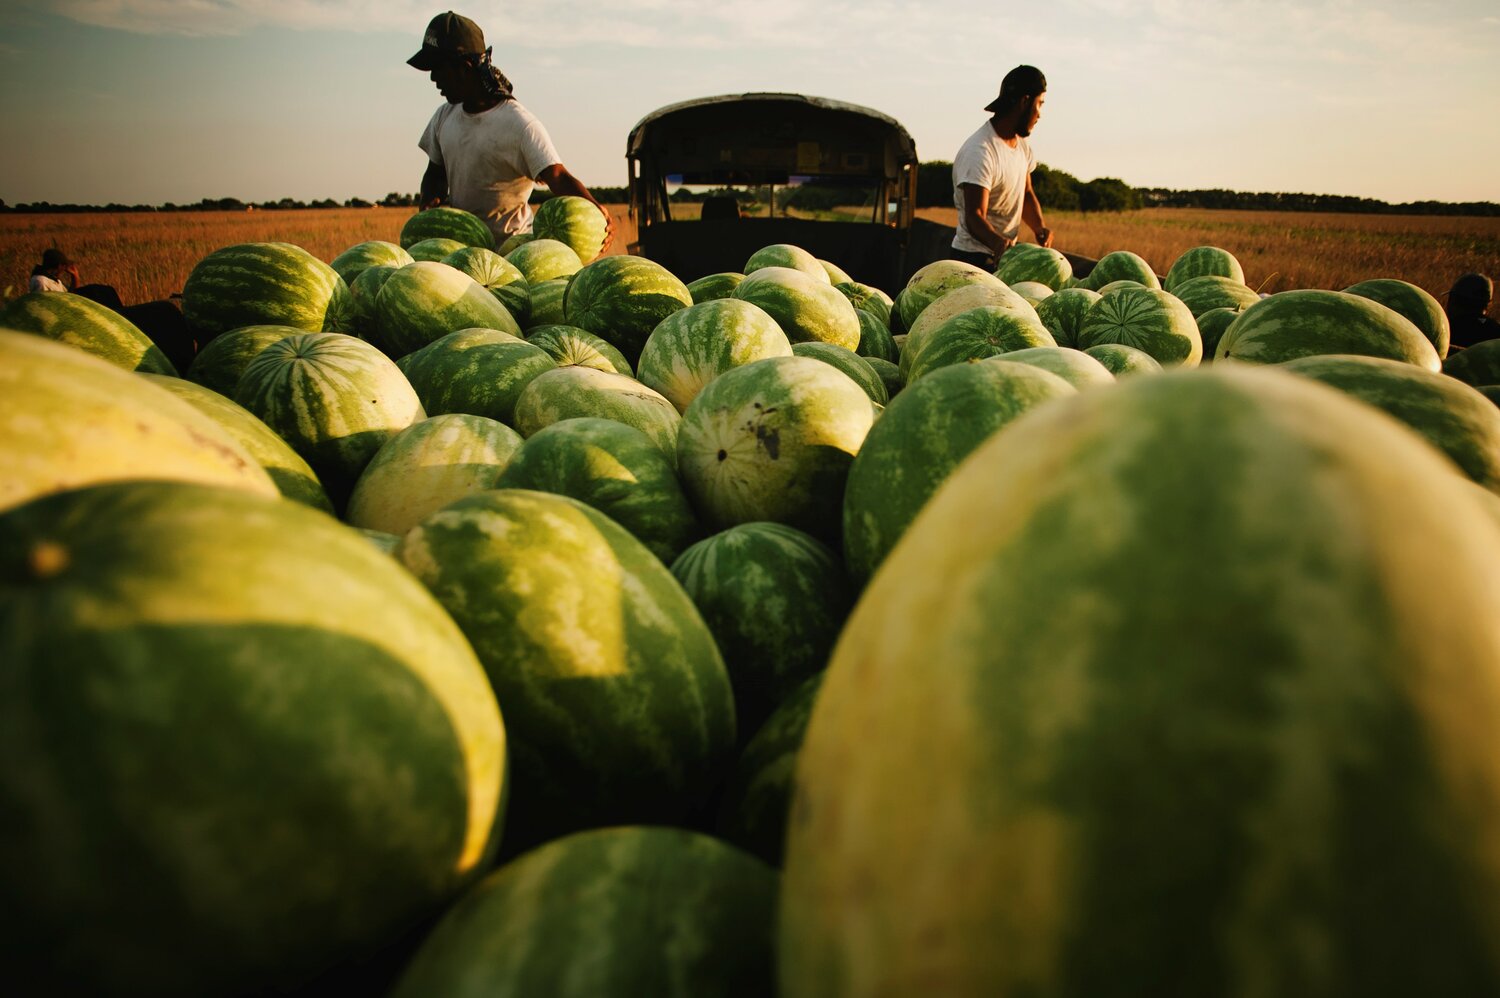 With watermelon harvest underway, migrant workers are finding lots to do. At First Baptist Church in Rochelle, Ga., 30 migrant workers attending an appreciation dinner became followers of Christ. (National Watermelon Association/Philip Pietri)